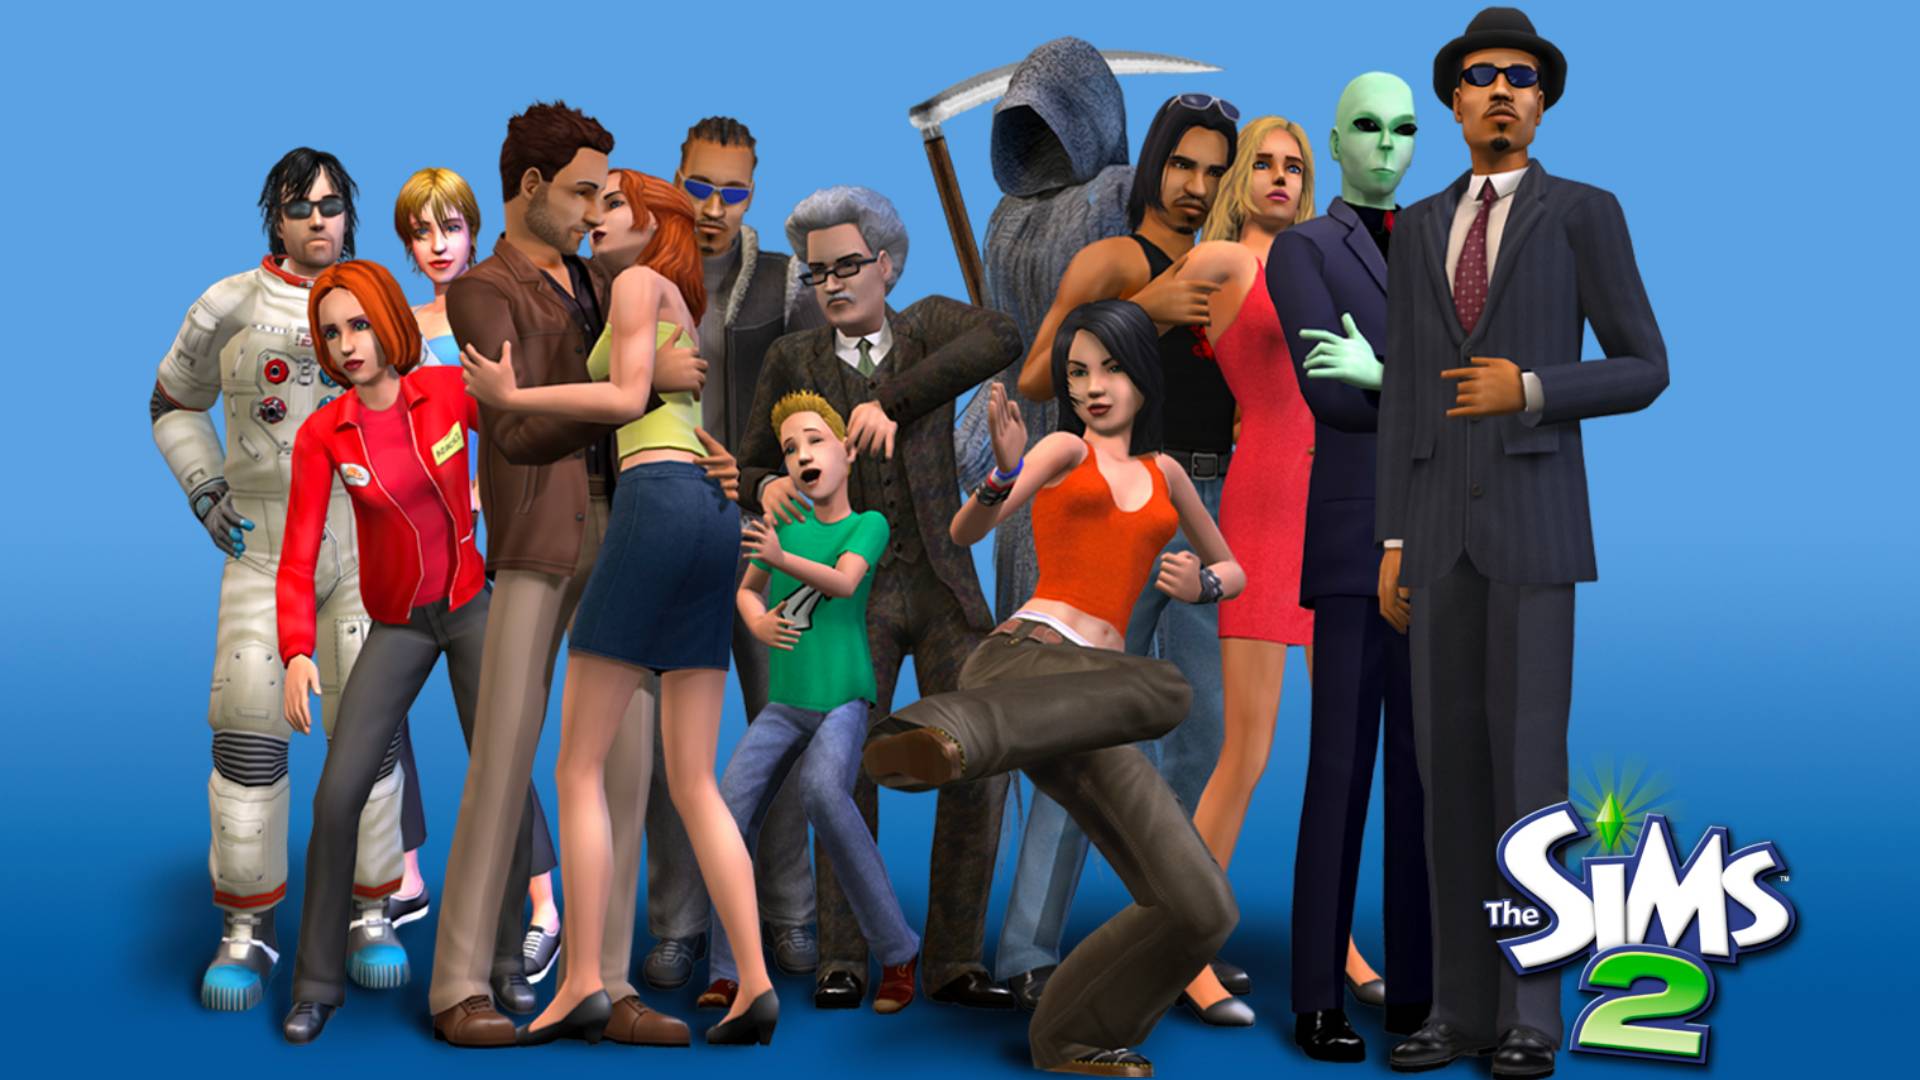 The Sims 2 PC Latest Version Free Download